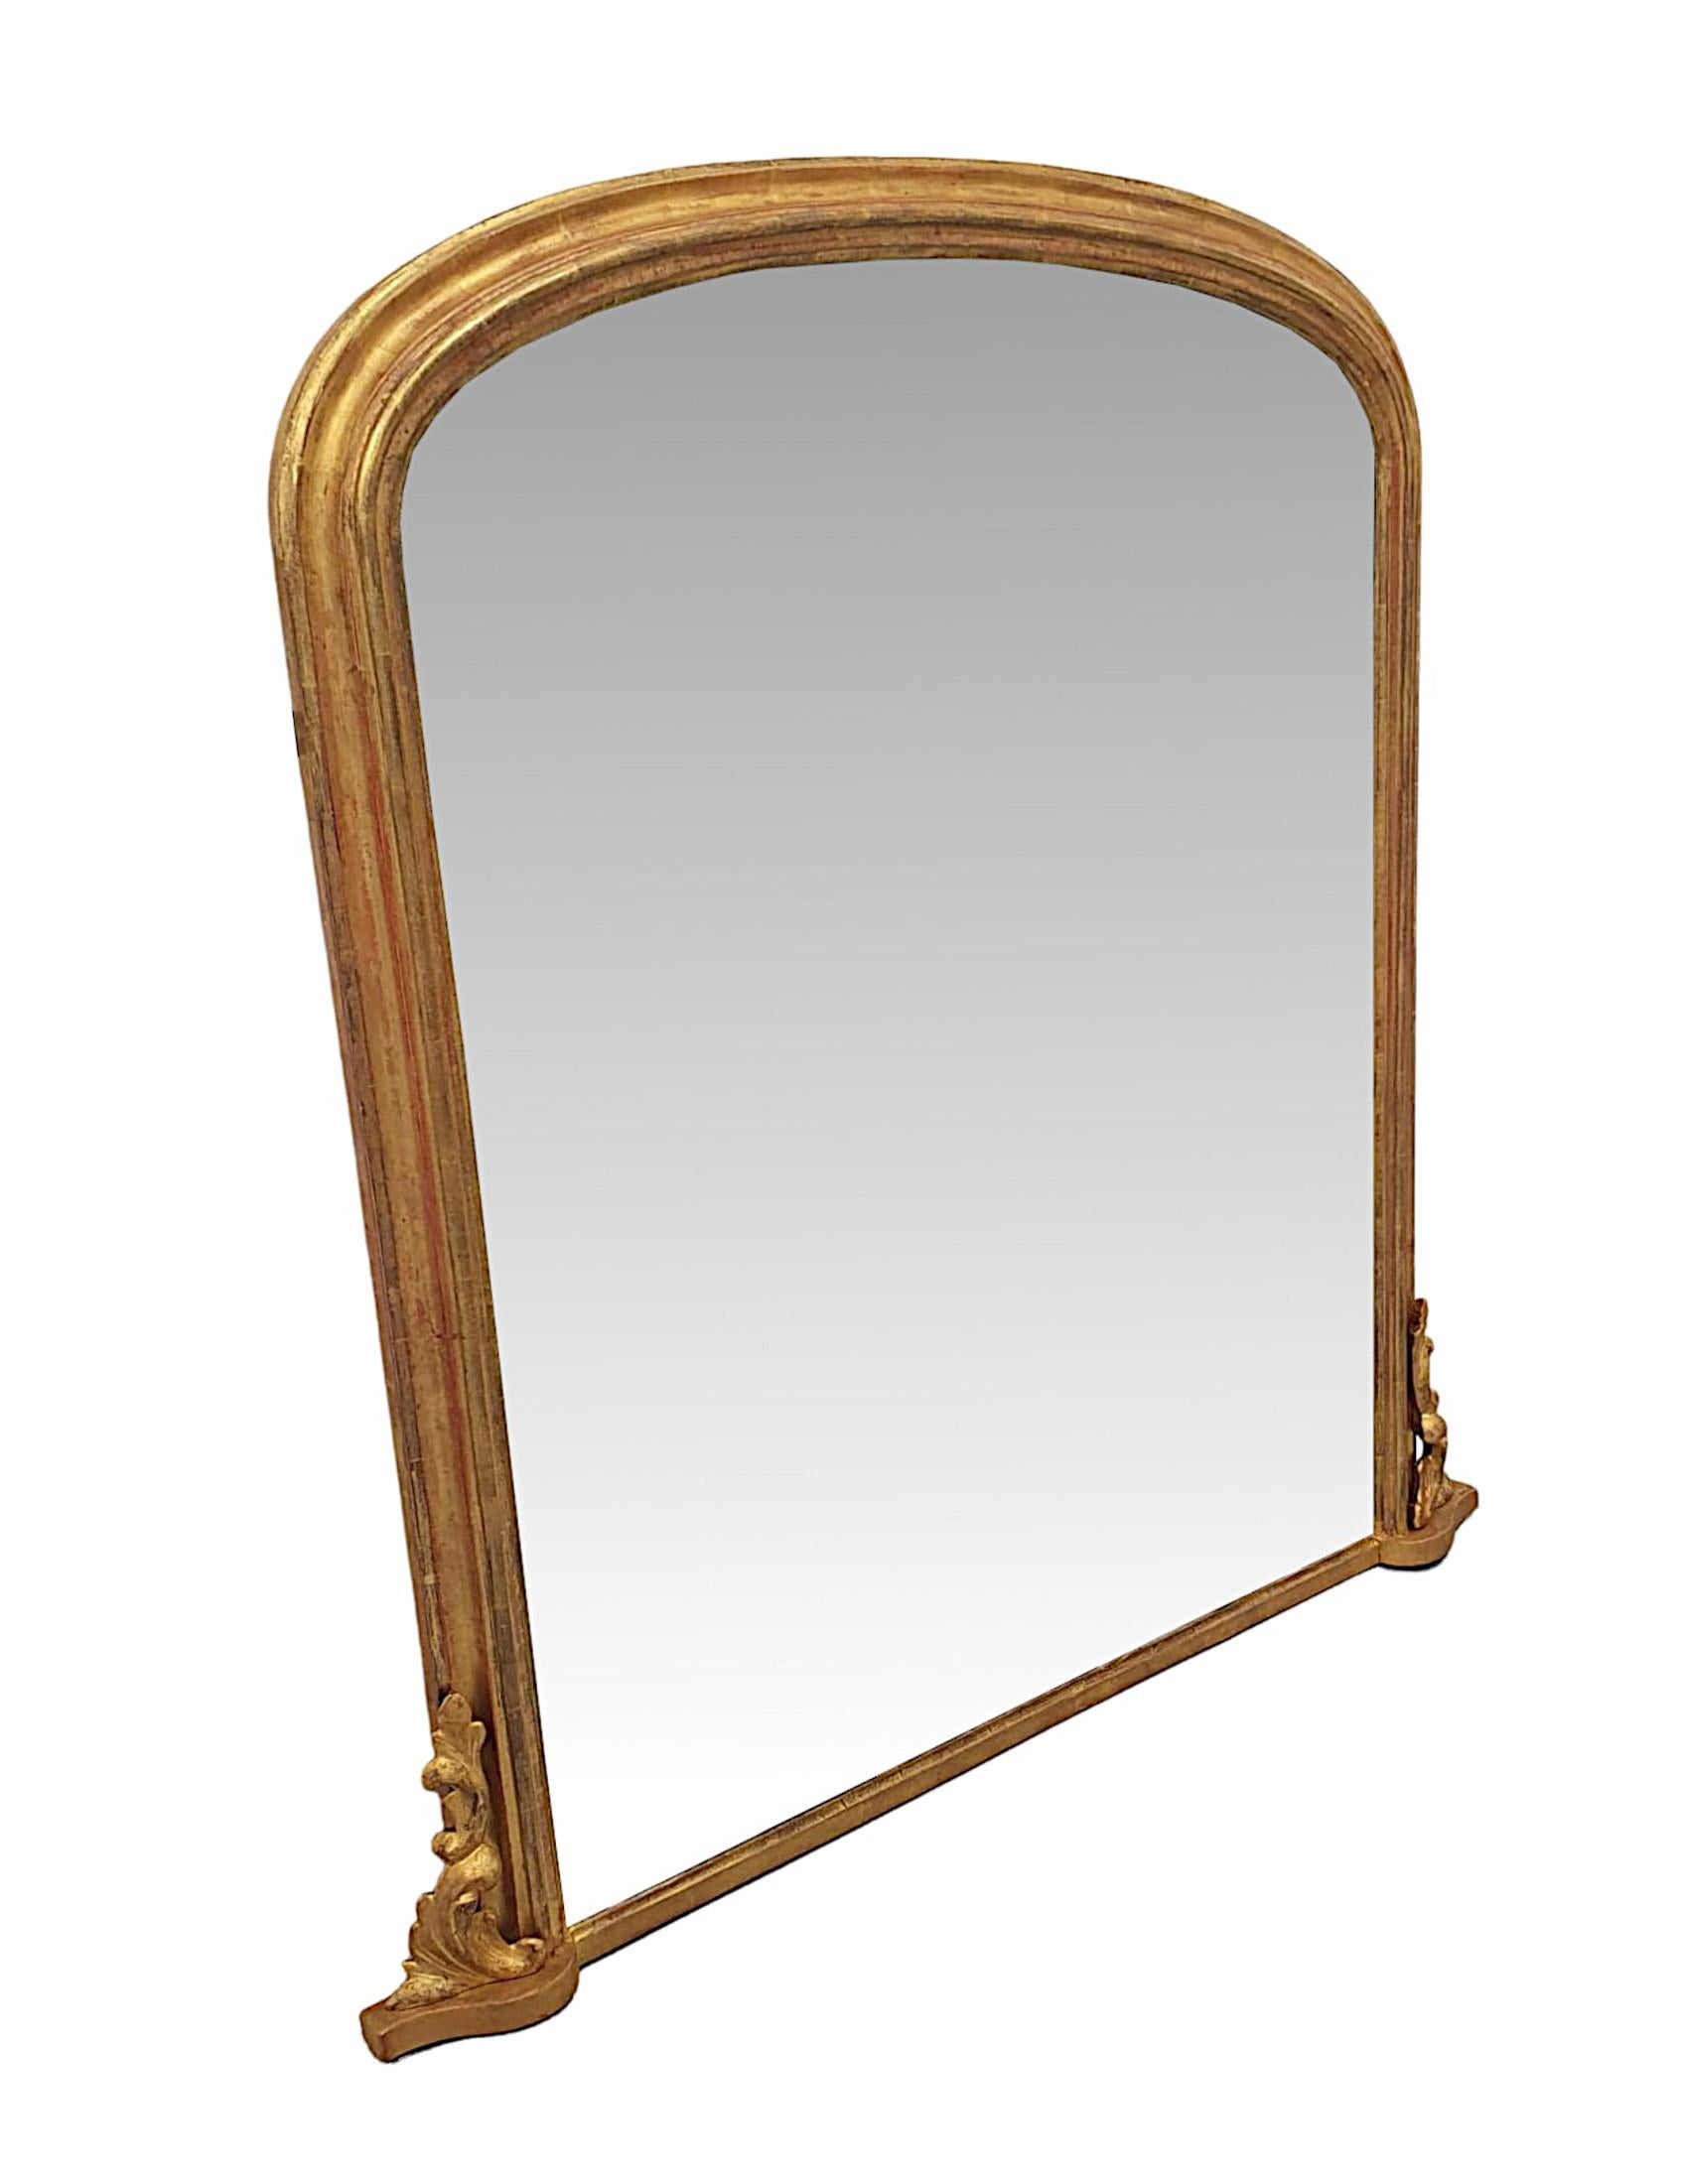 A stunning 19th Century elegantly, simple giltwood overmantle mirror. The mirror glass plate is set within a finely hand carved, moulded and fluted giltwood frame of arch top form, supported on shaped platform base with a gorgeous arrangement of